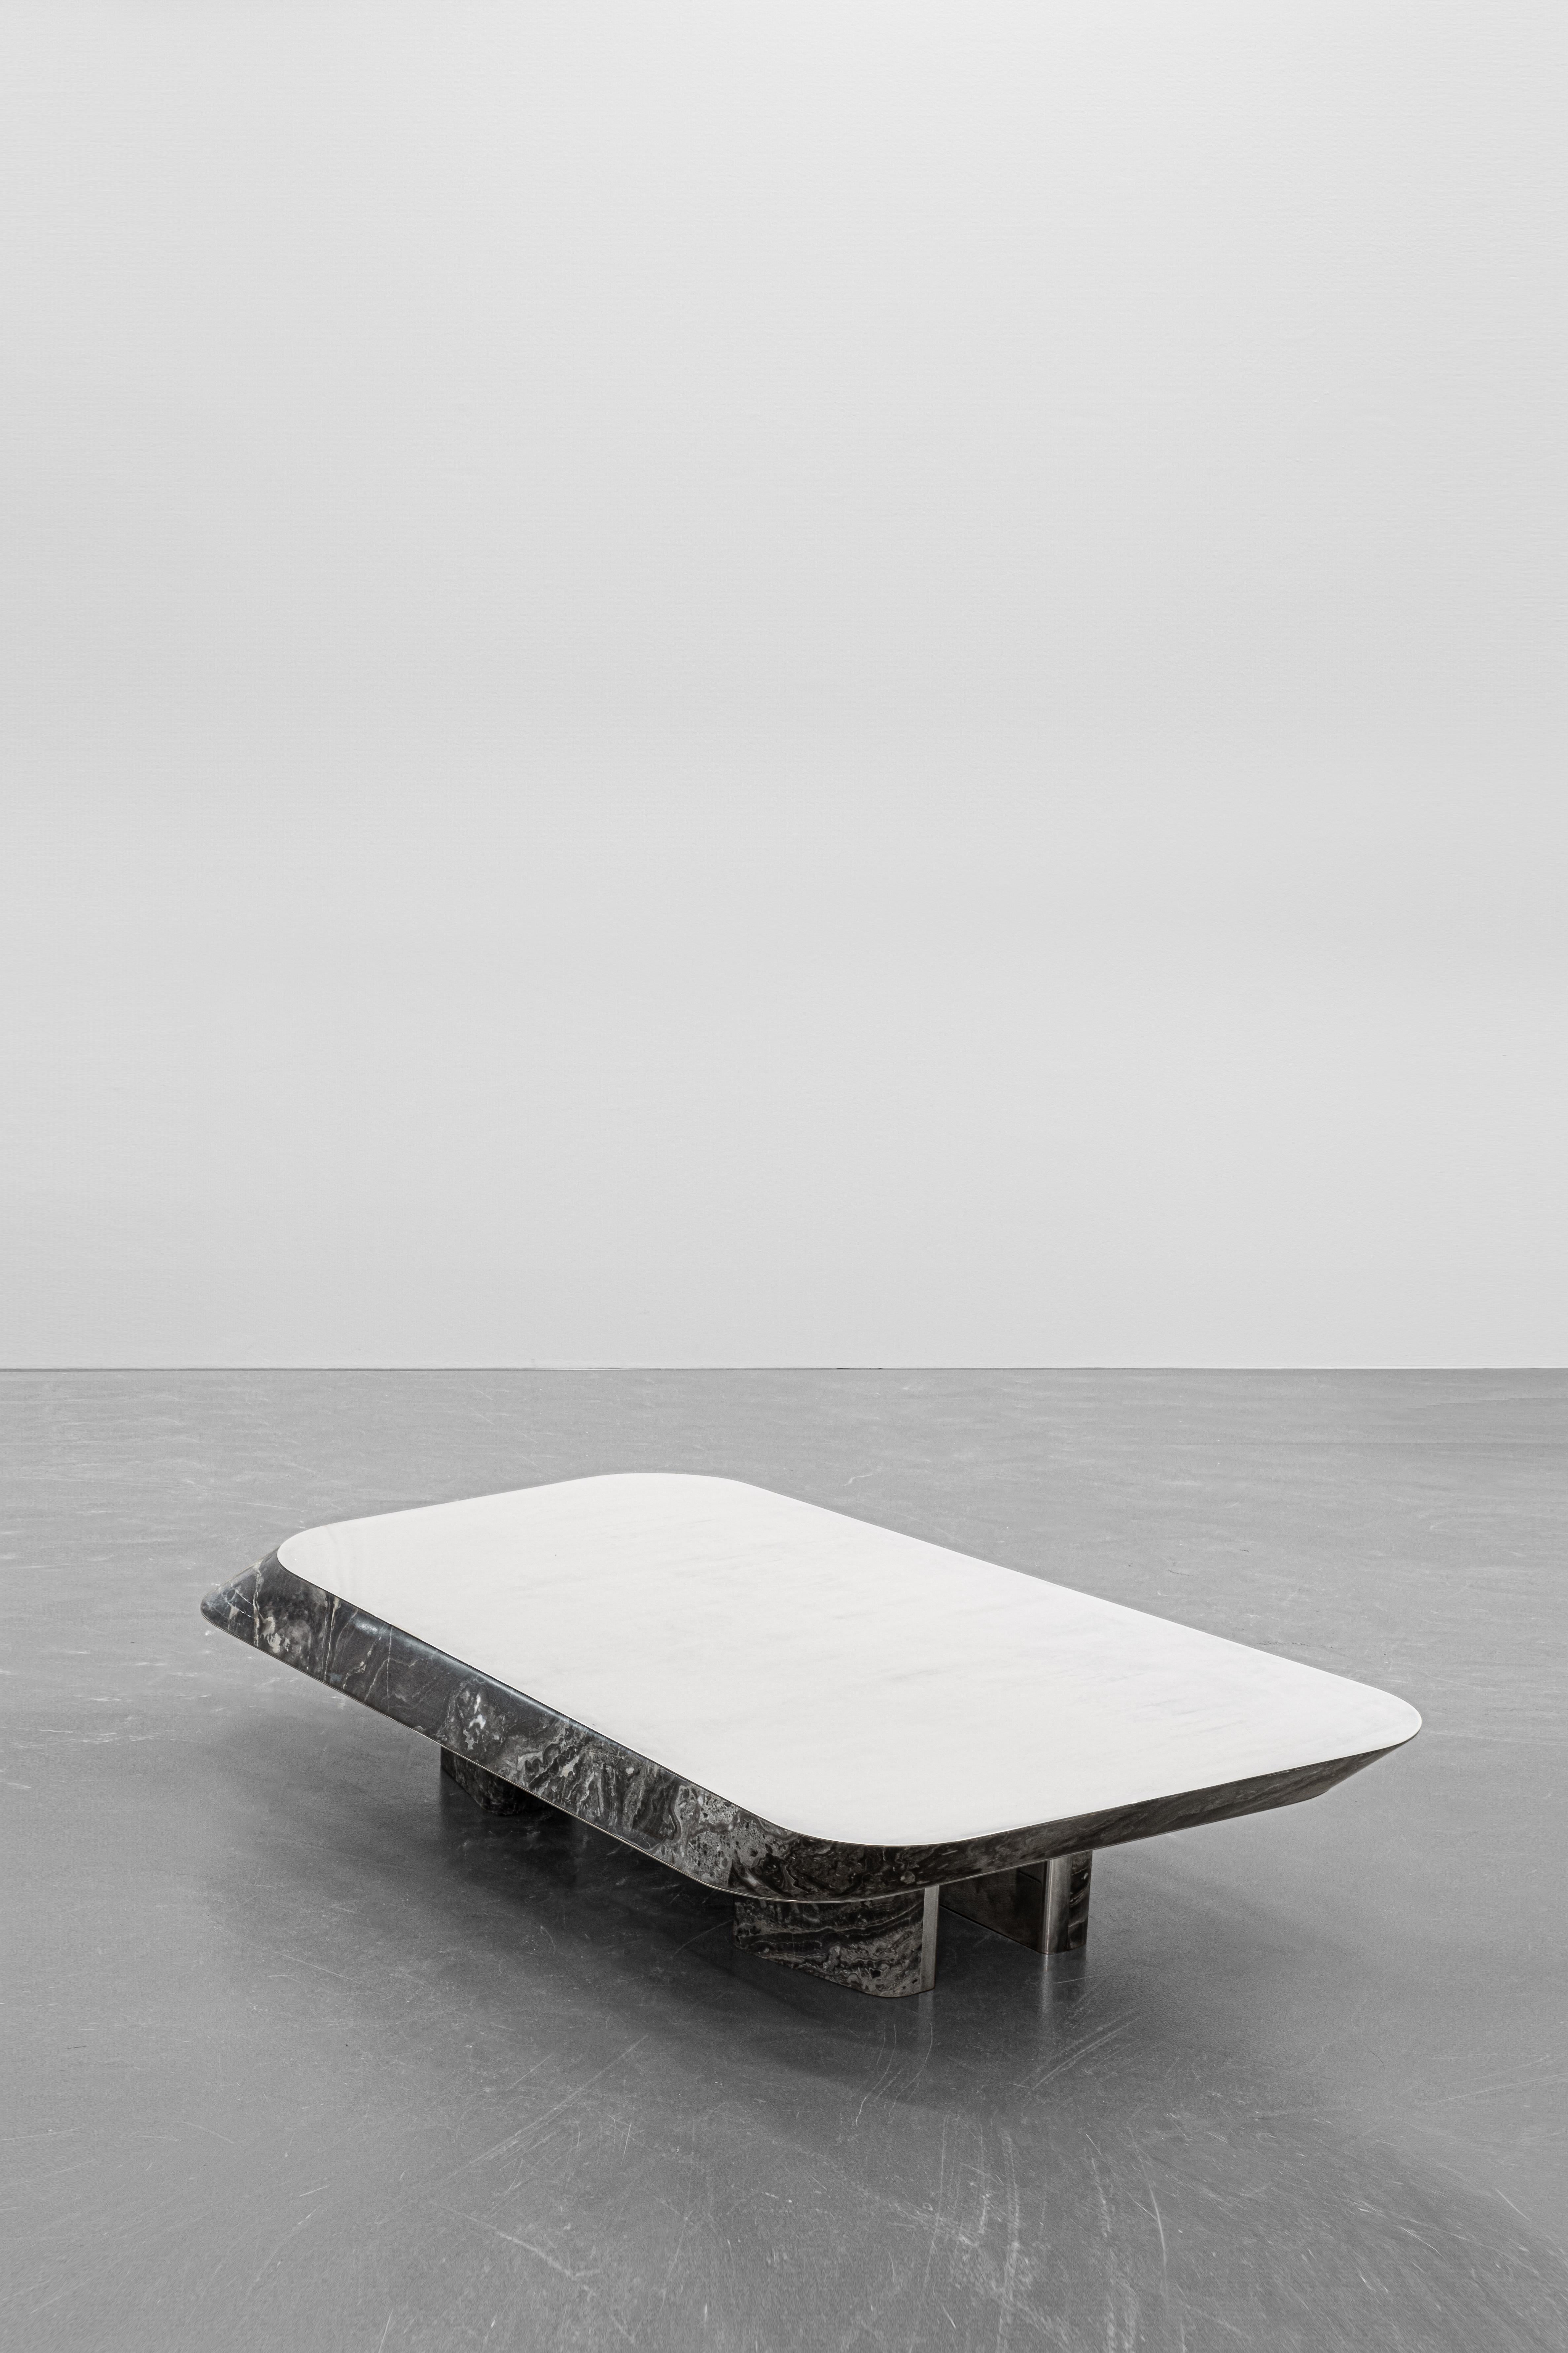 Object 1 marble coffee table by Emelianova Studio
Distortion Series Vol 1 Limited Edition of 20
Signed and numbered
Dimensions: 154 × 88 × 29.4 cm
Materials: Silver plated, hand patinated brass, marble
Handmade 

Distortion series is a bold